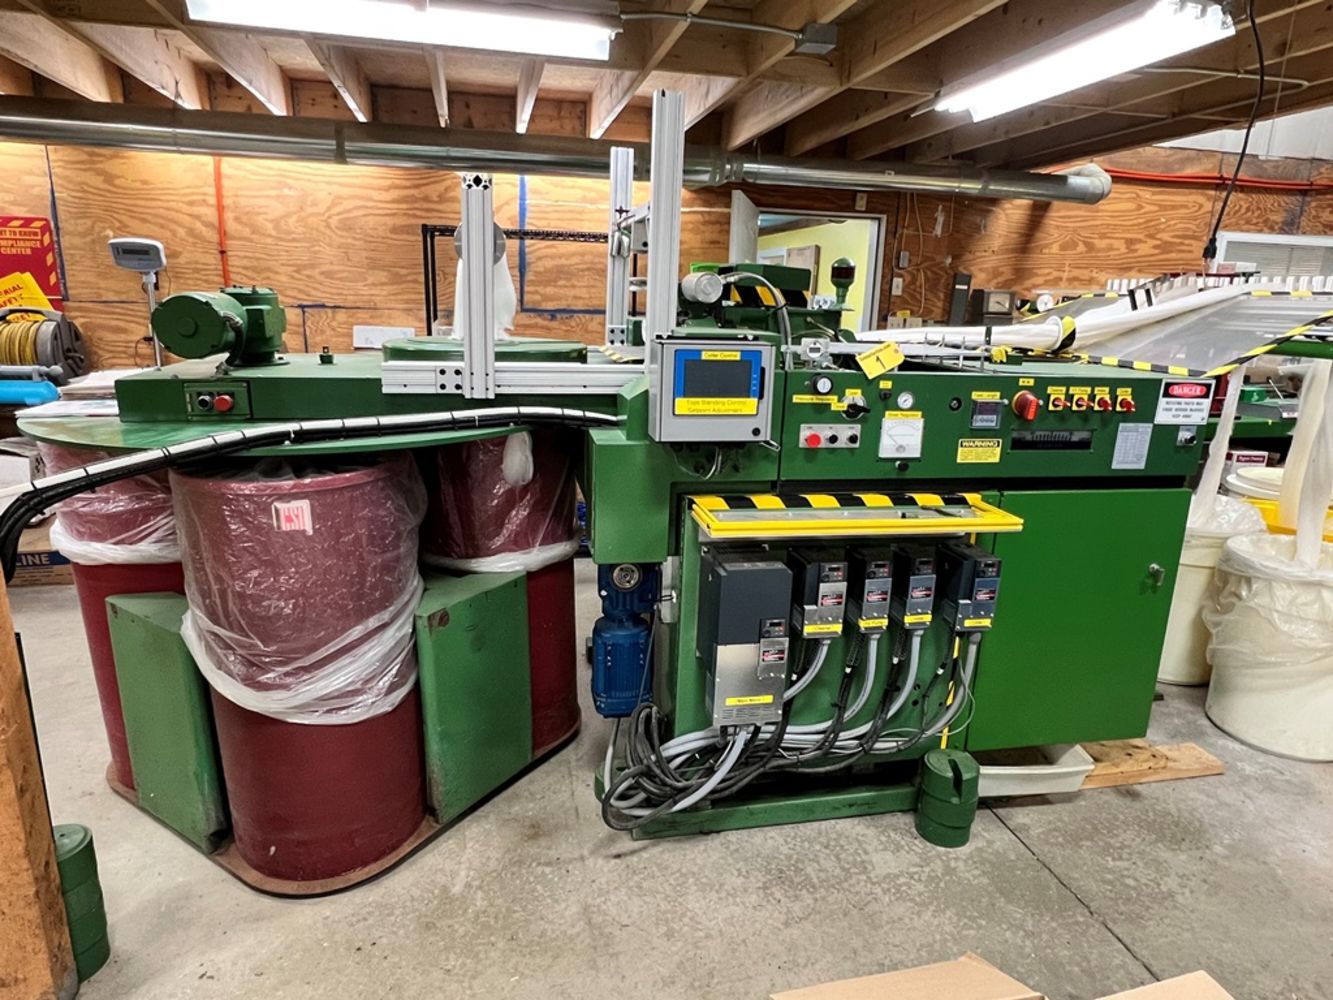 23-6 PUBLIC TIMED ONLINE AUCTION ~ WOOL PROCESSING & SUPPORT EQUIPMENT, CROWN WALKIE STACKER, AUTO PELLET BOILER, WOOL INVENTORY